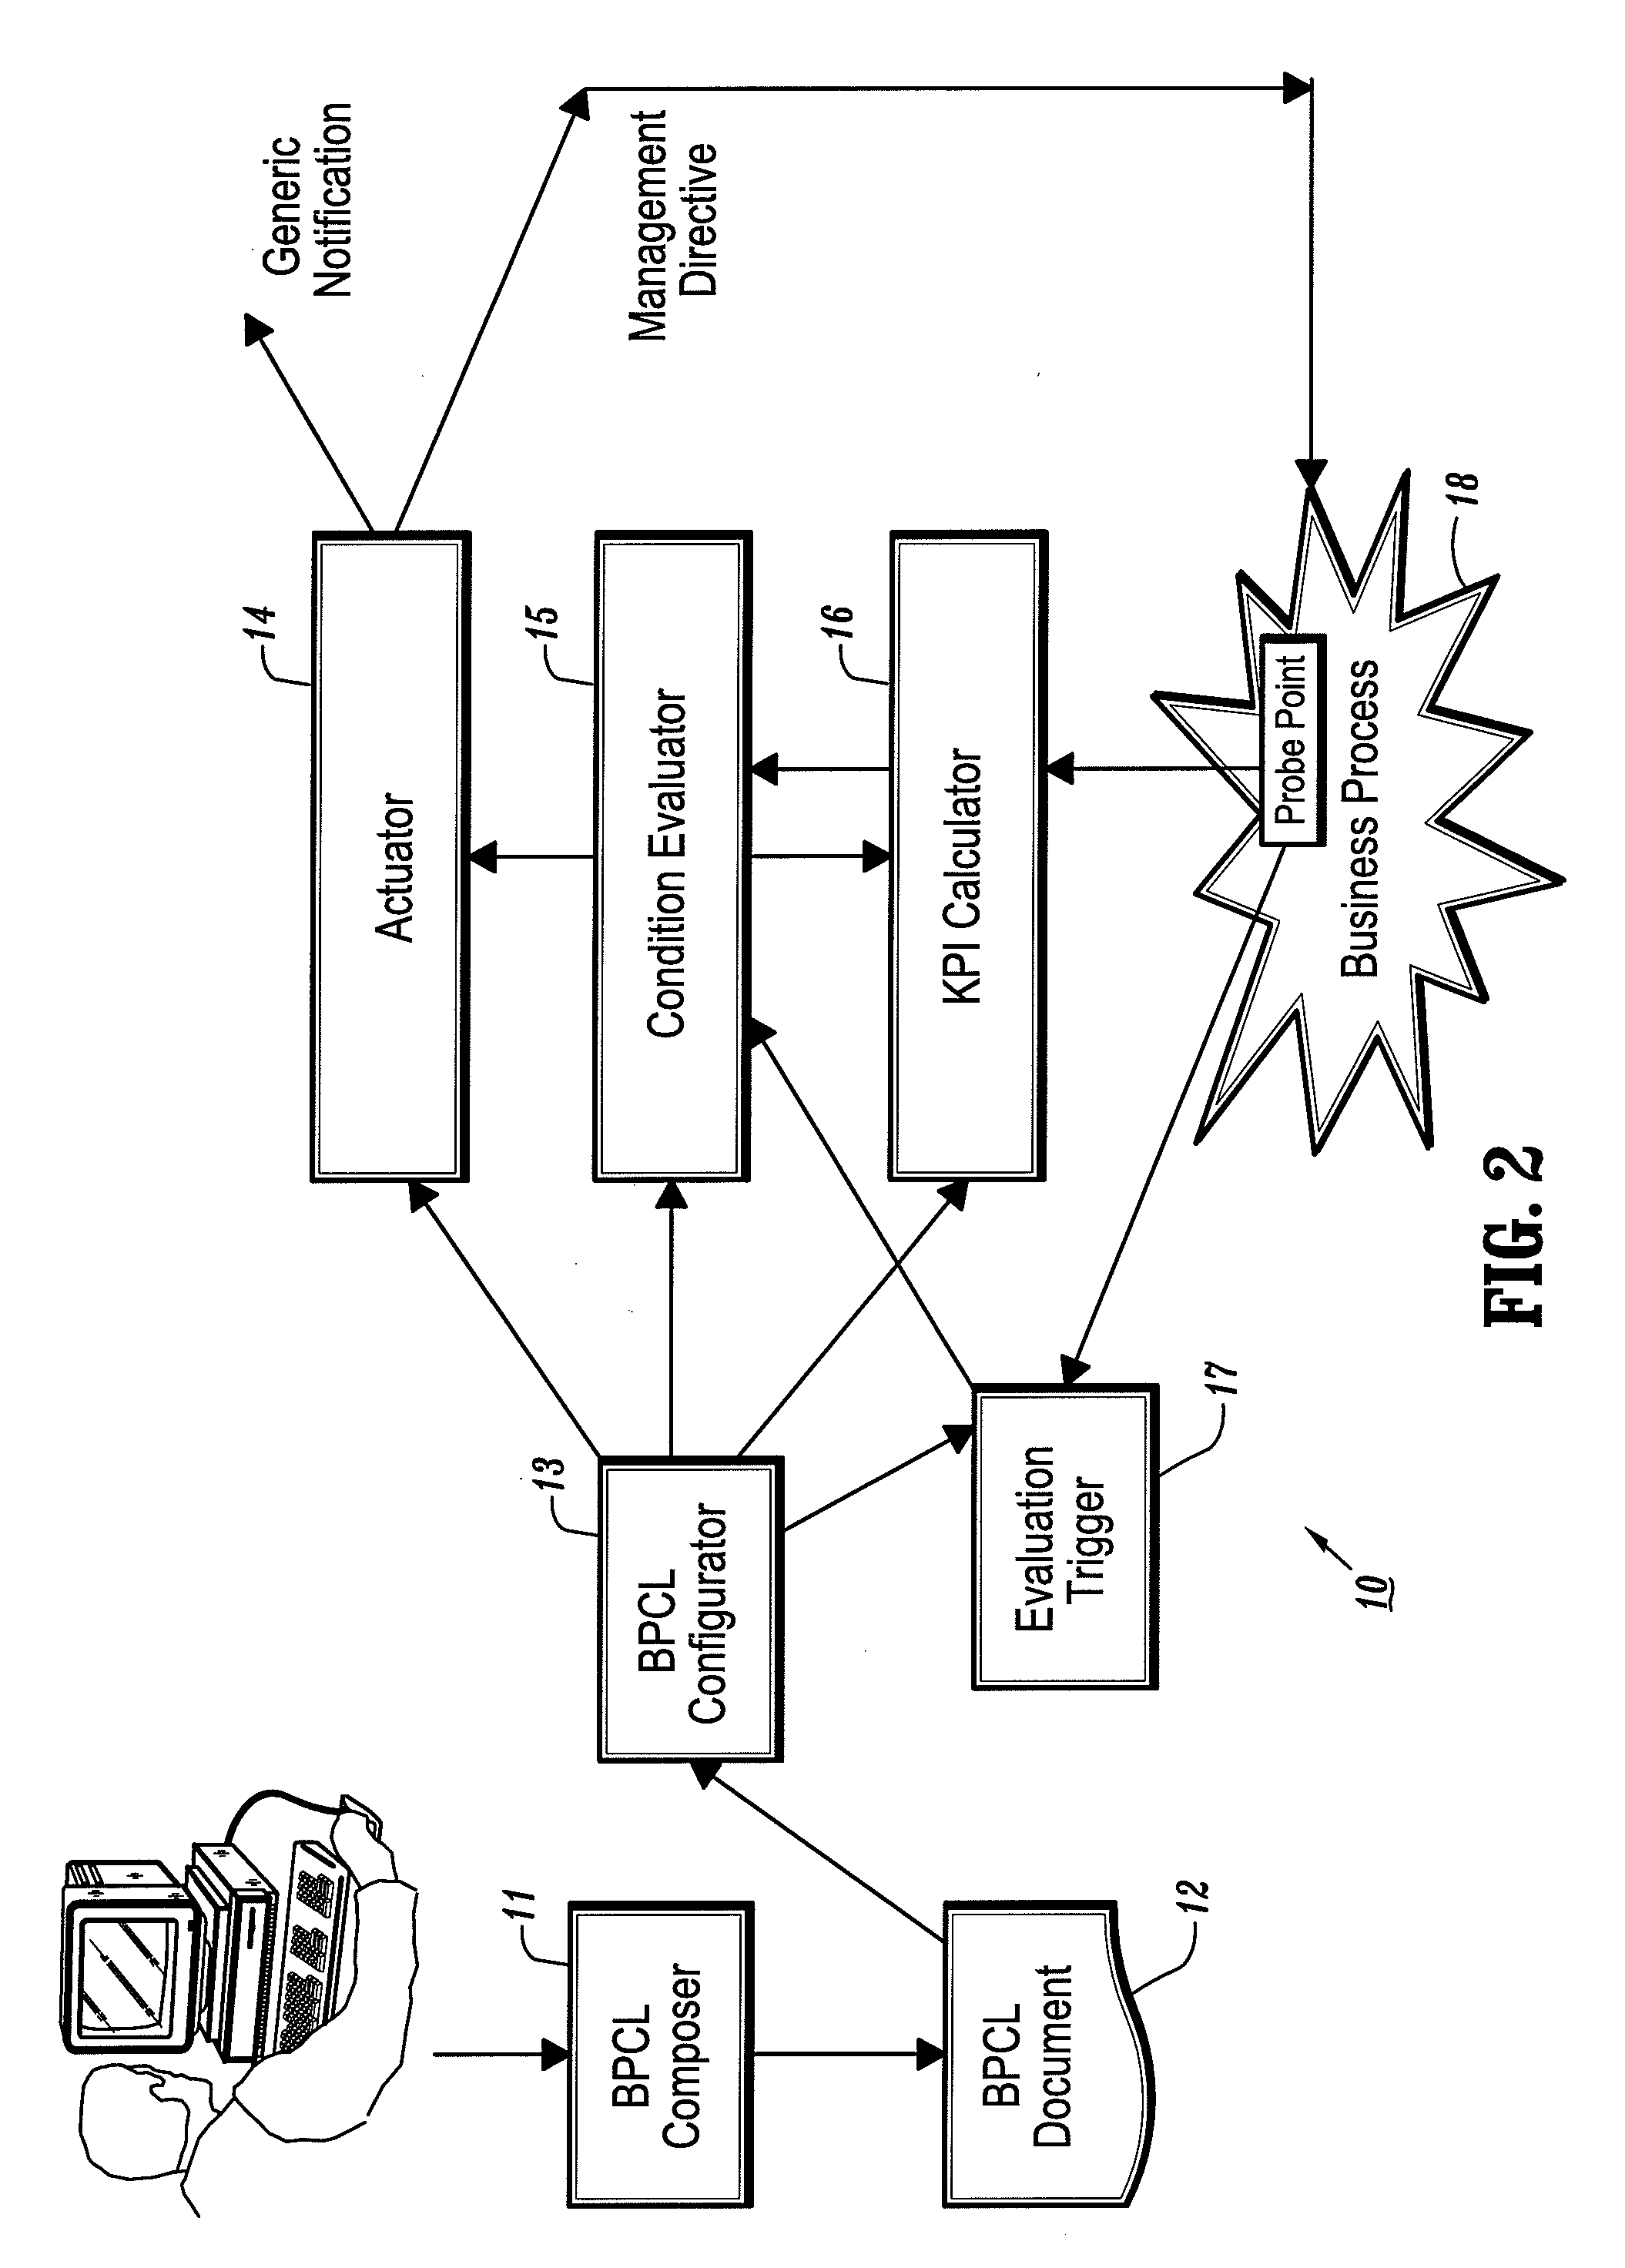 Systems and methods for monitoring and controlling business level service level agreements